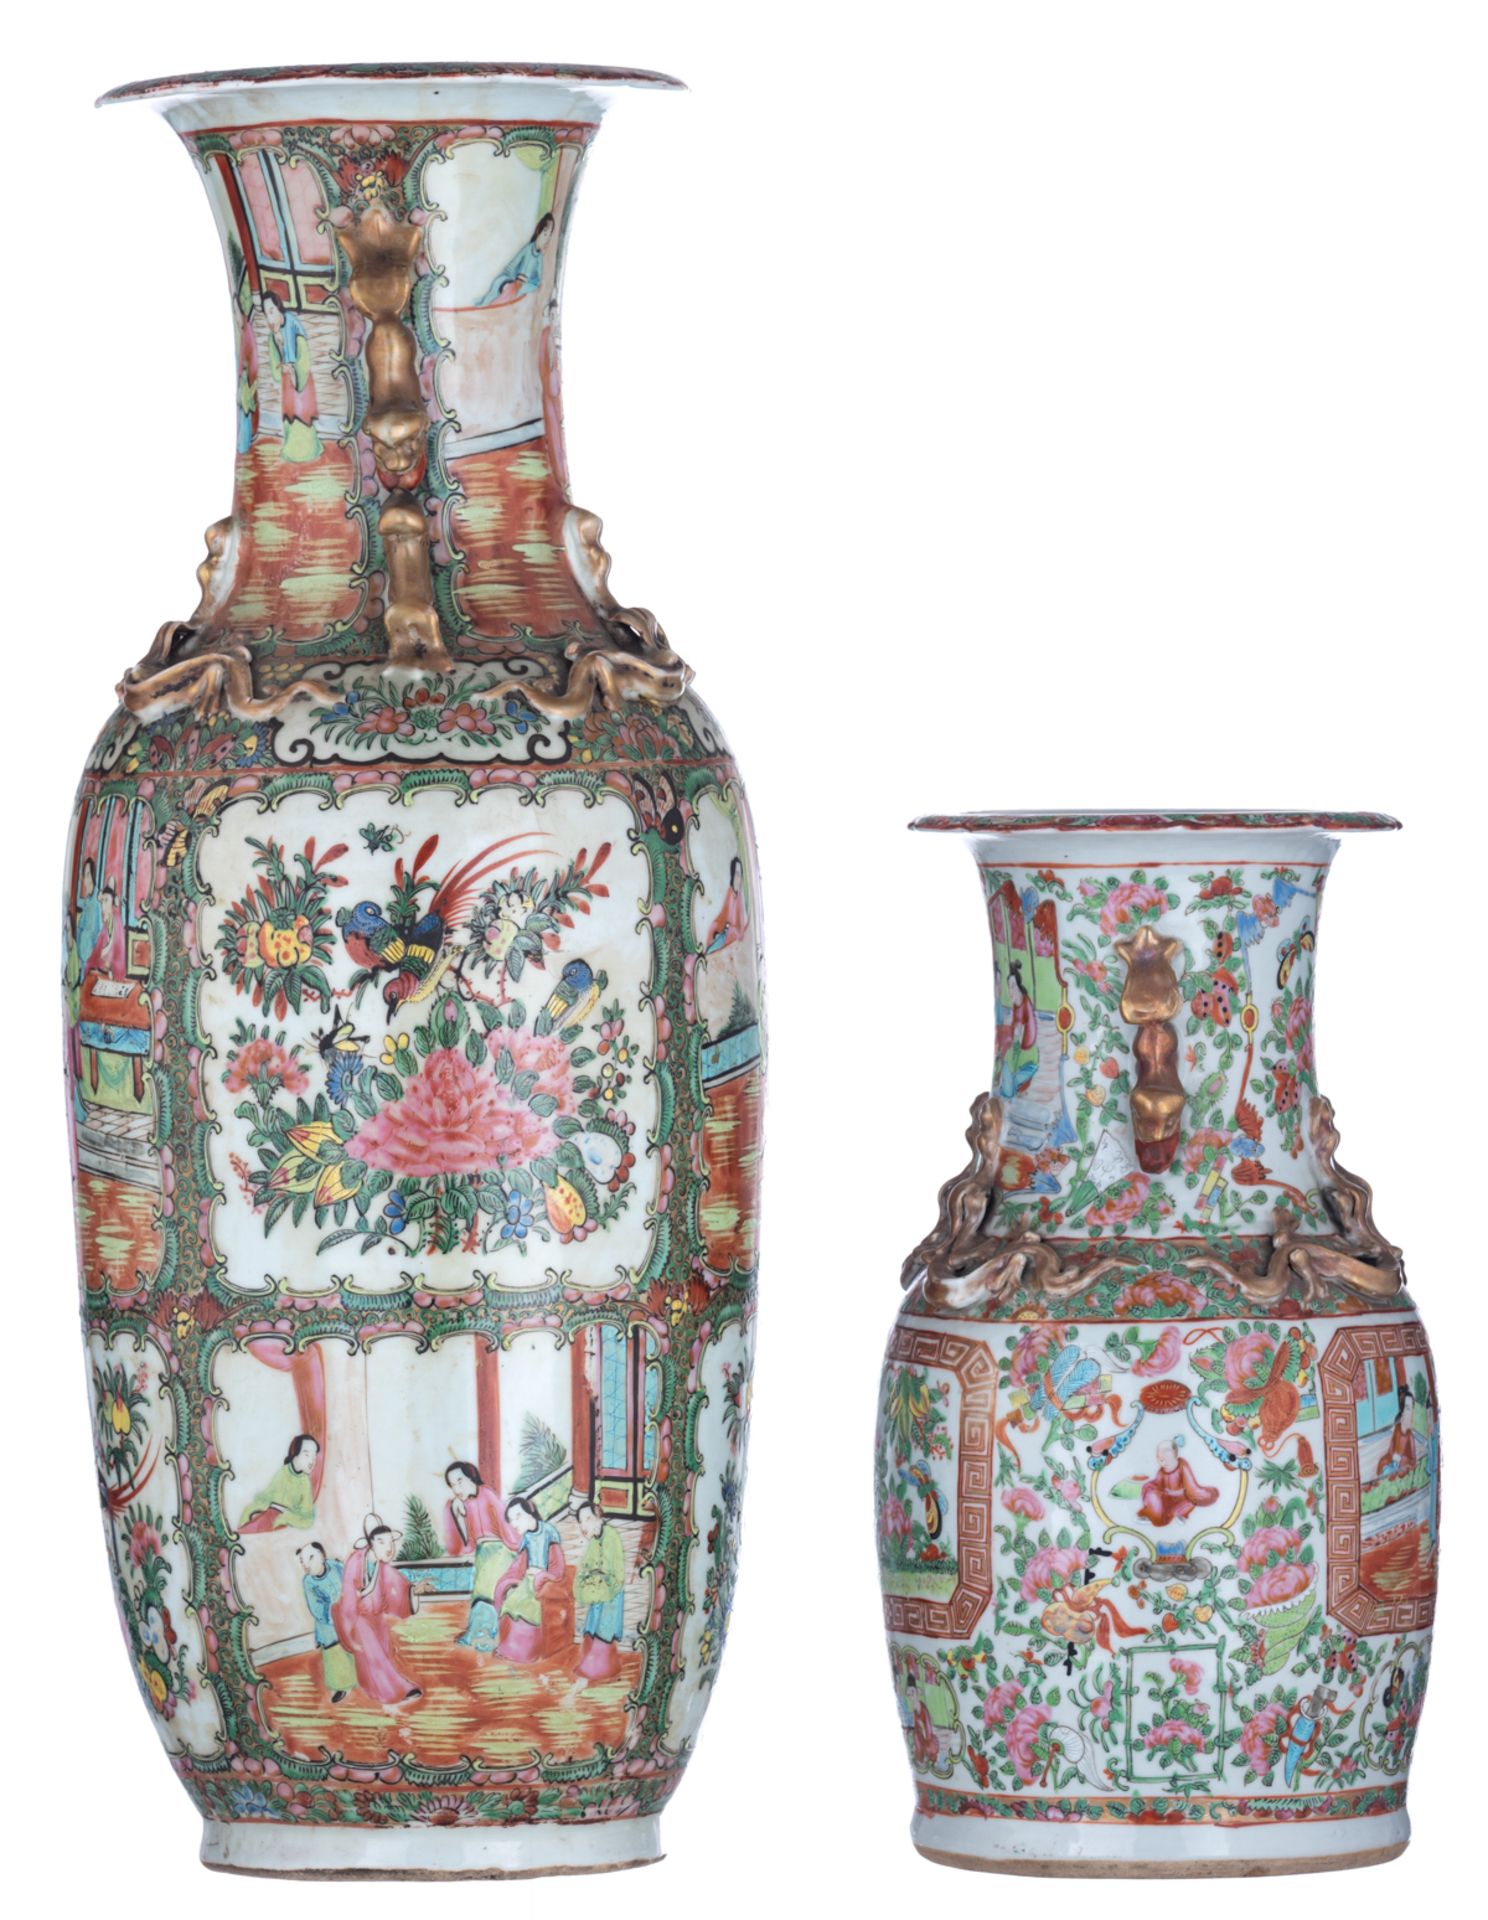 Two Chinese Canton polychrome vases, decorated with figures, birds and flowers, H 35,5 - 60 cm - Image 3 of 7